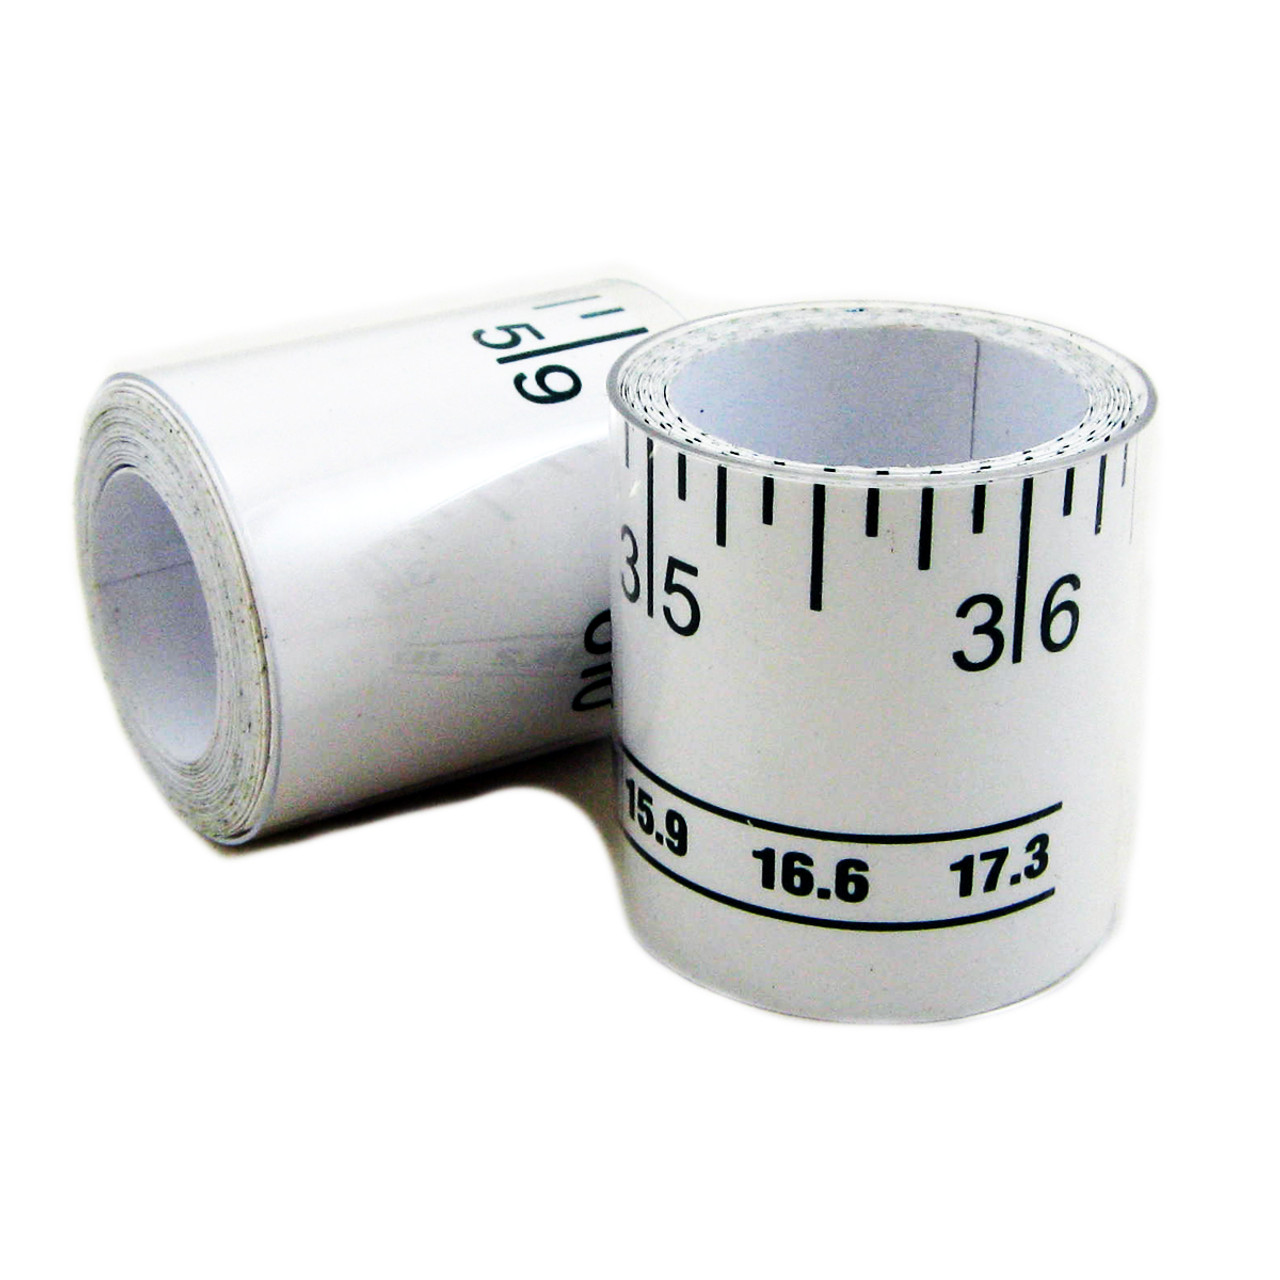 https://cdn11.bigcommerce.com/s-of90v1eaxl/images/stencil/1280x1280/products/522/1249/Adhesive_Measuring_Tapes__06335.1615406311.jpg?c=1